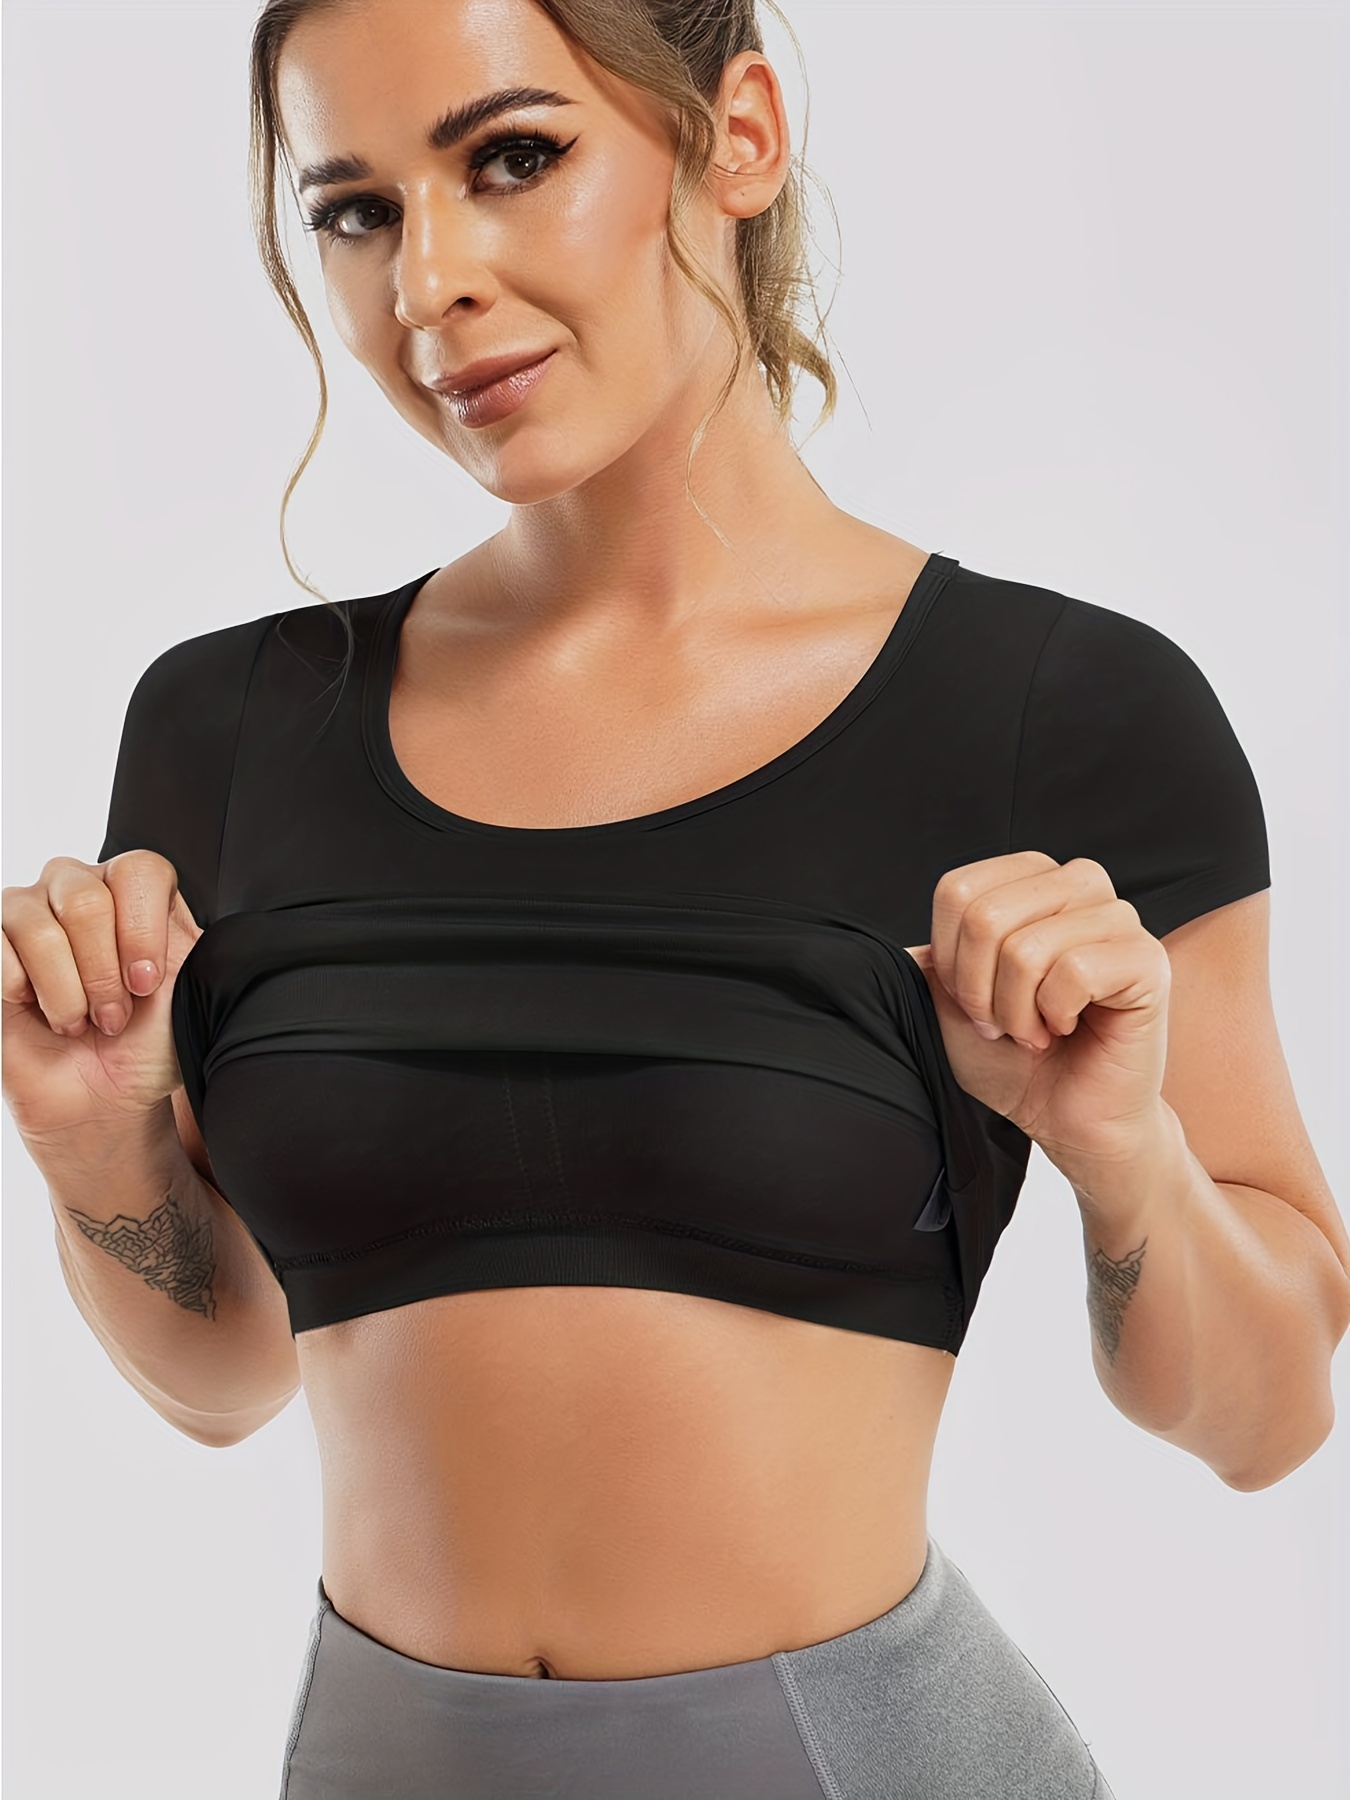 TrainingGirl Women's Slim Fit Workout Tops Mesh Back Yoga Crop Tops Short  Sleeve Athletic Gym Fitness Shirt with Built in Bra - black - Medium -  ShopStyle